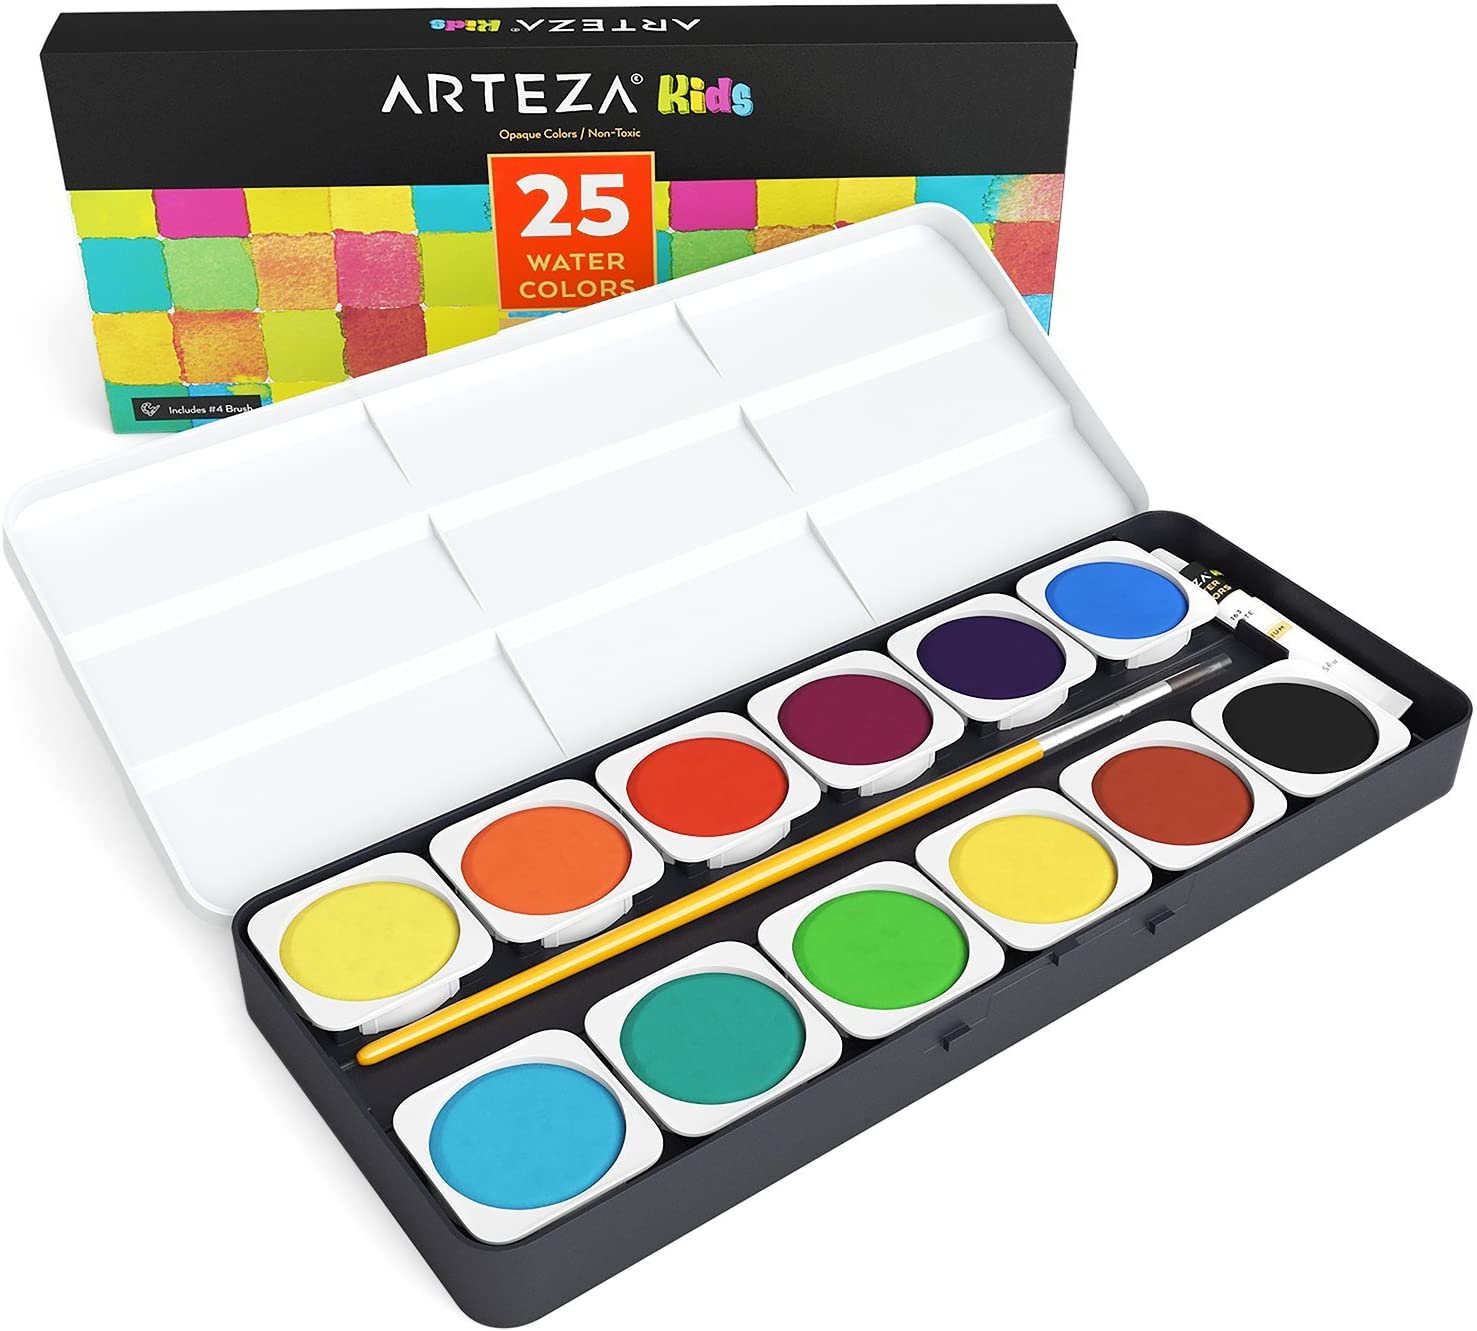 ARTEZA Watercolor Paint Set, 25 Vibrant Water Colors with Brush, Watercolor  Palette for Artists & Adults, Ideal for Painting, Sketching, Illustrating